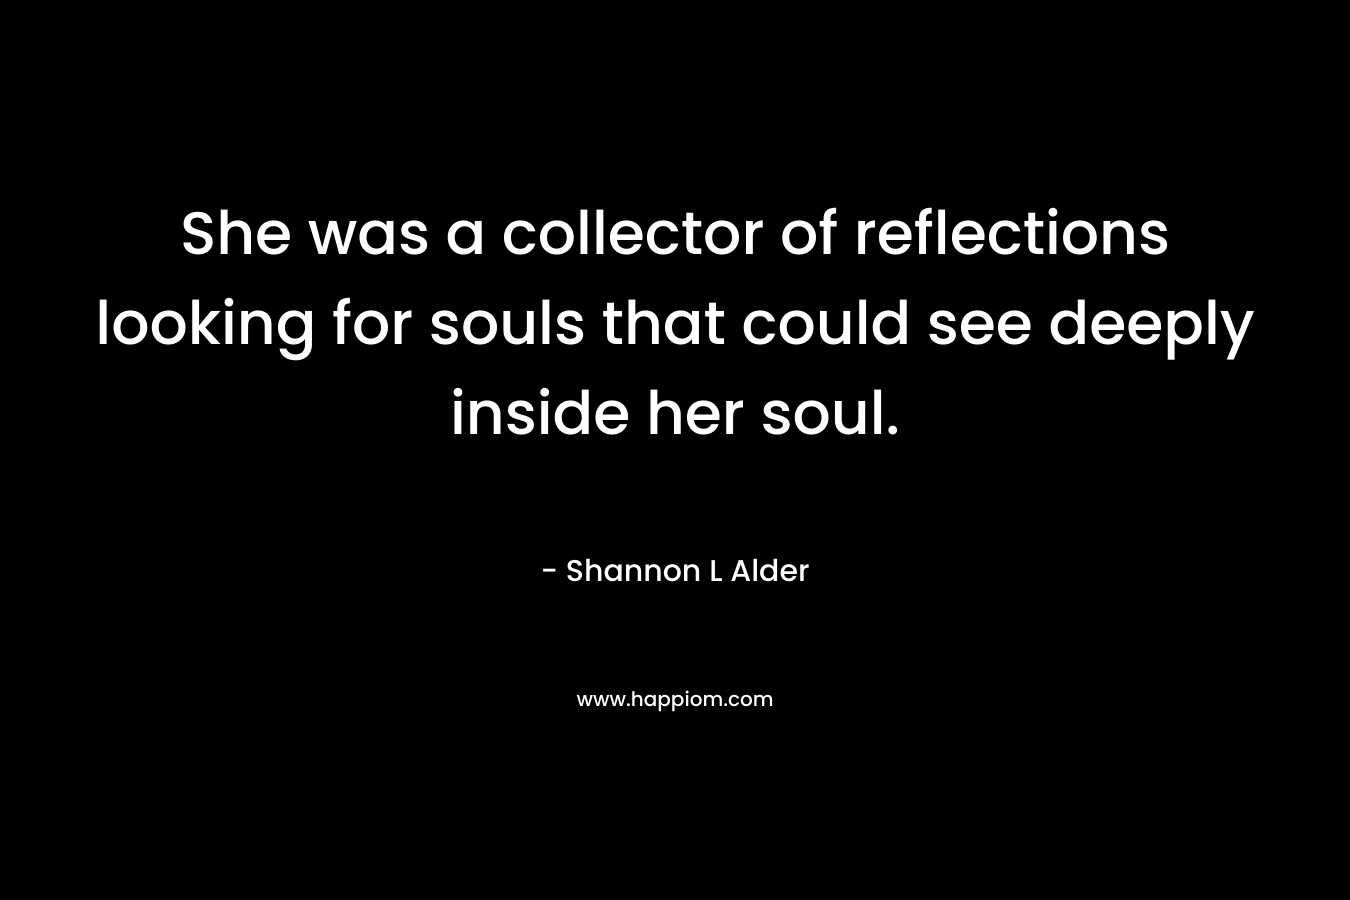 She was a collector of reflections looking for souls that could see deeply inside her soul. – Shannon L Alder